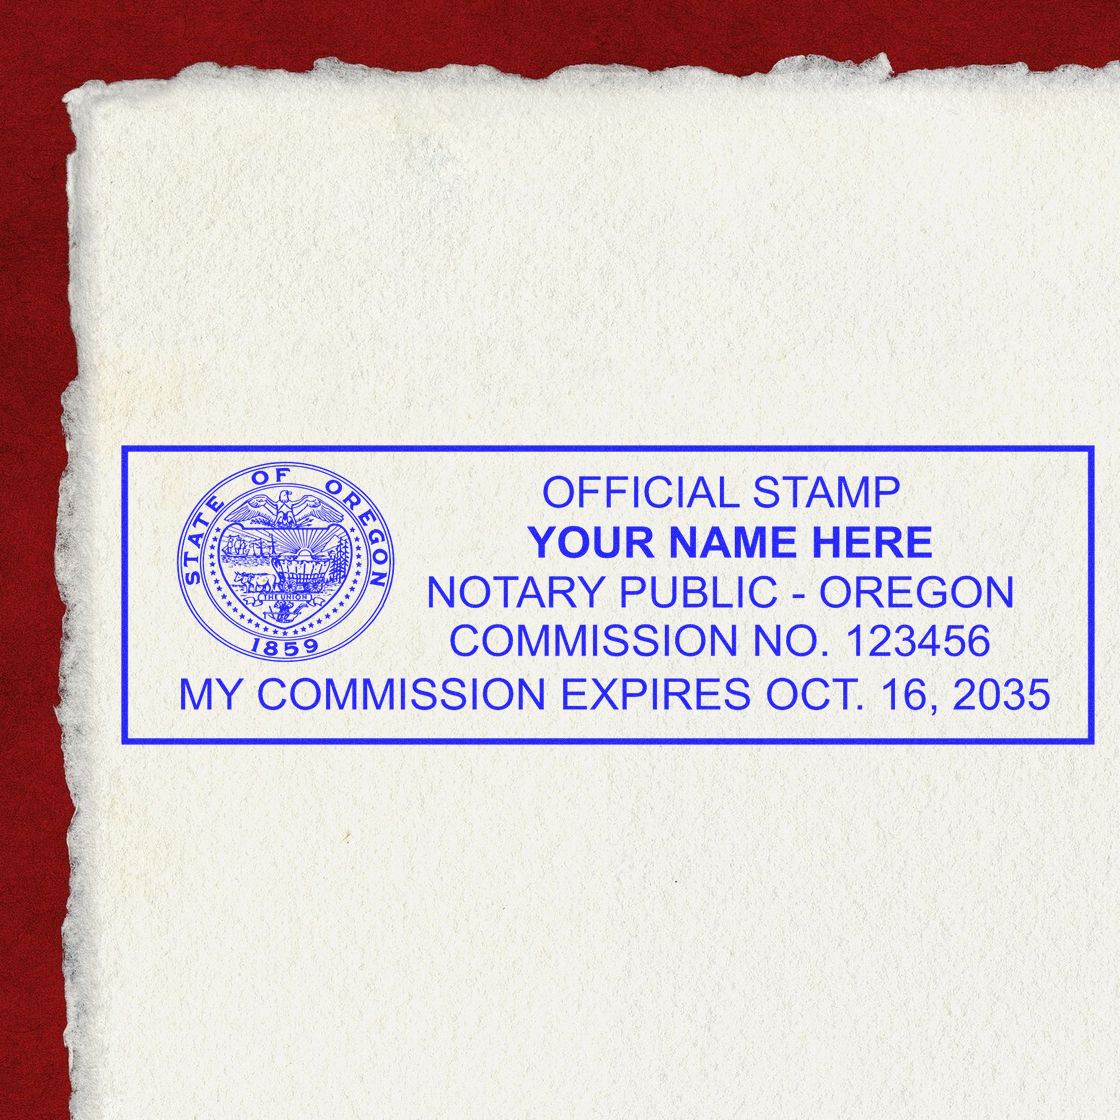 This paper is stamped with a sample imprint of the Wooden Handle Oregon Rectangular Notary Public Stamp, signifying its quality and reliability.